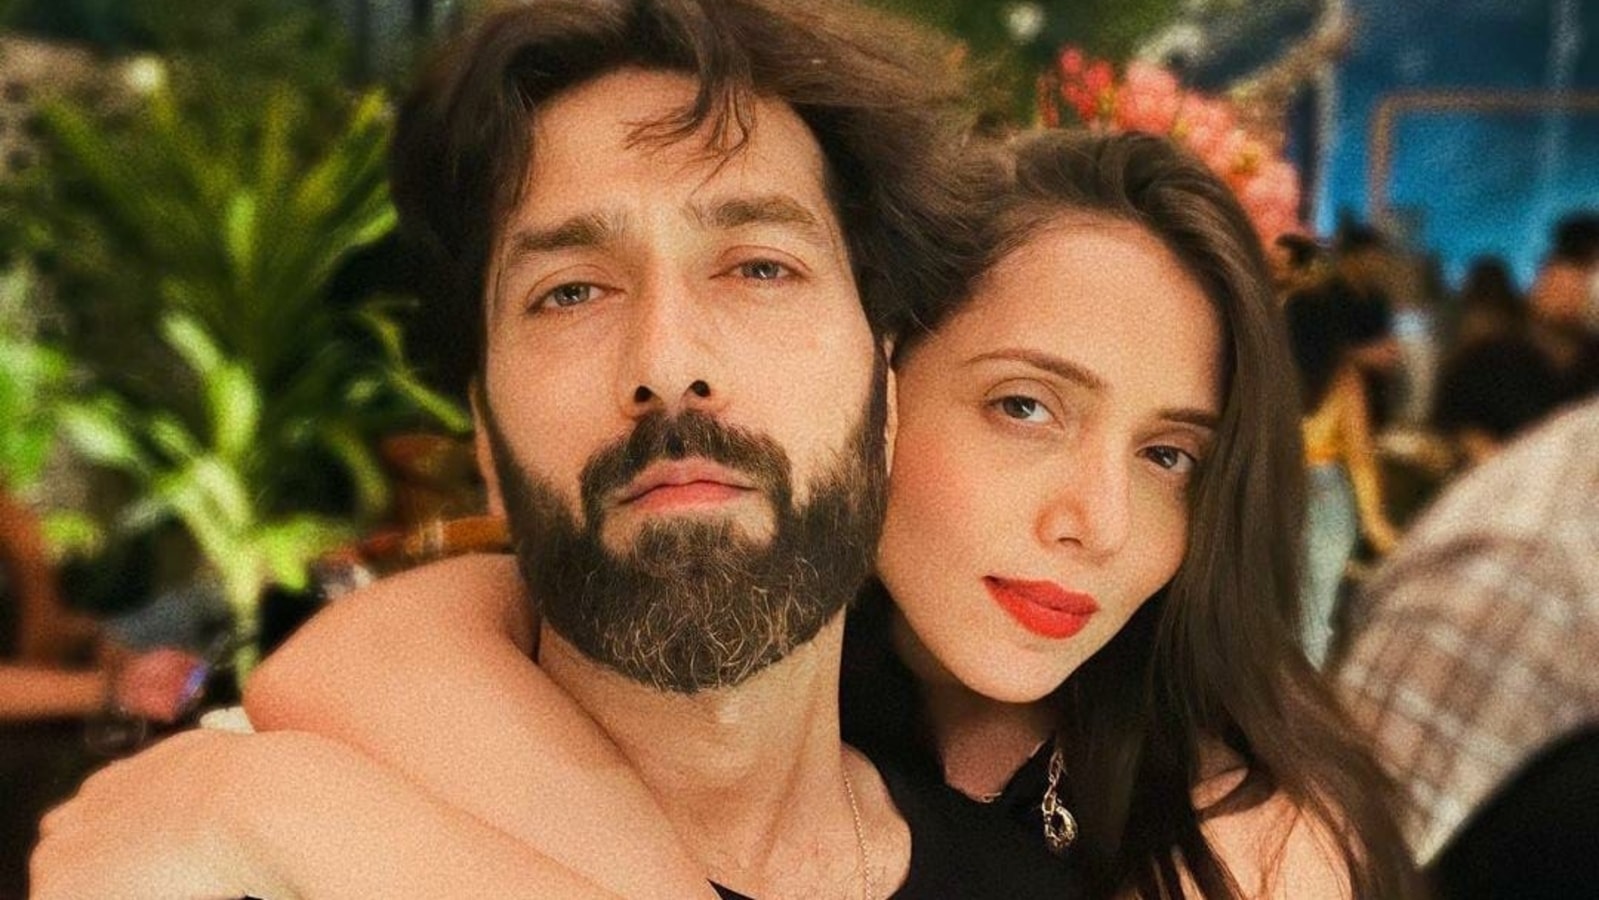 Nakuul Mehta shares loved-up photo with wife Jankee Parekh, Drashti Dhami reacts ‘what a pic’